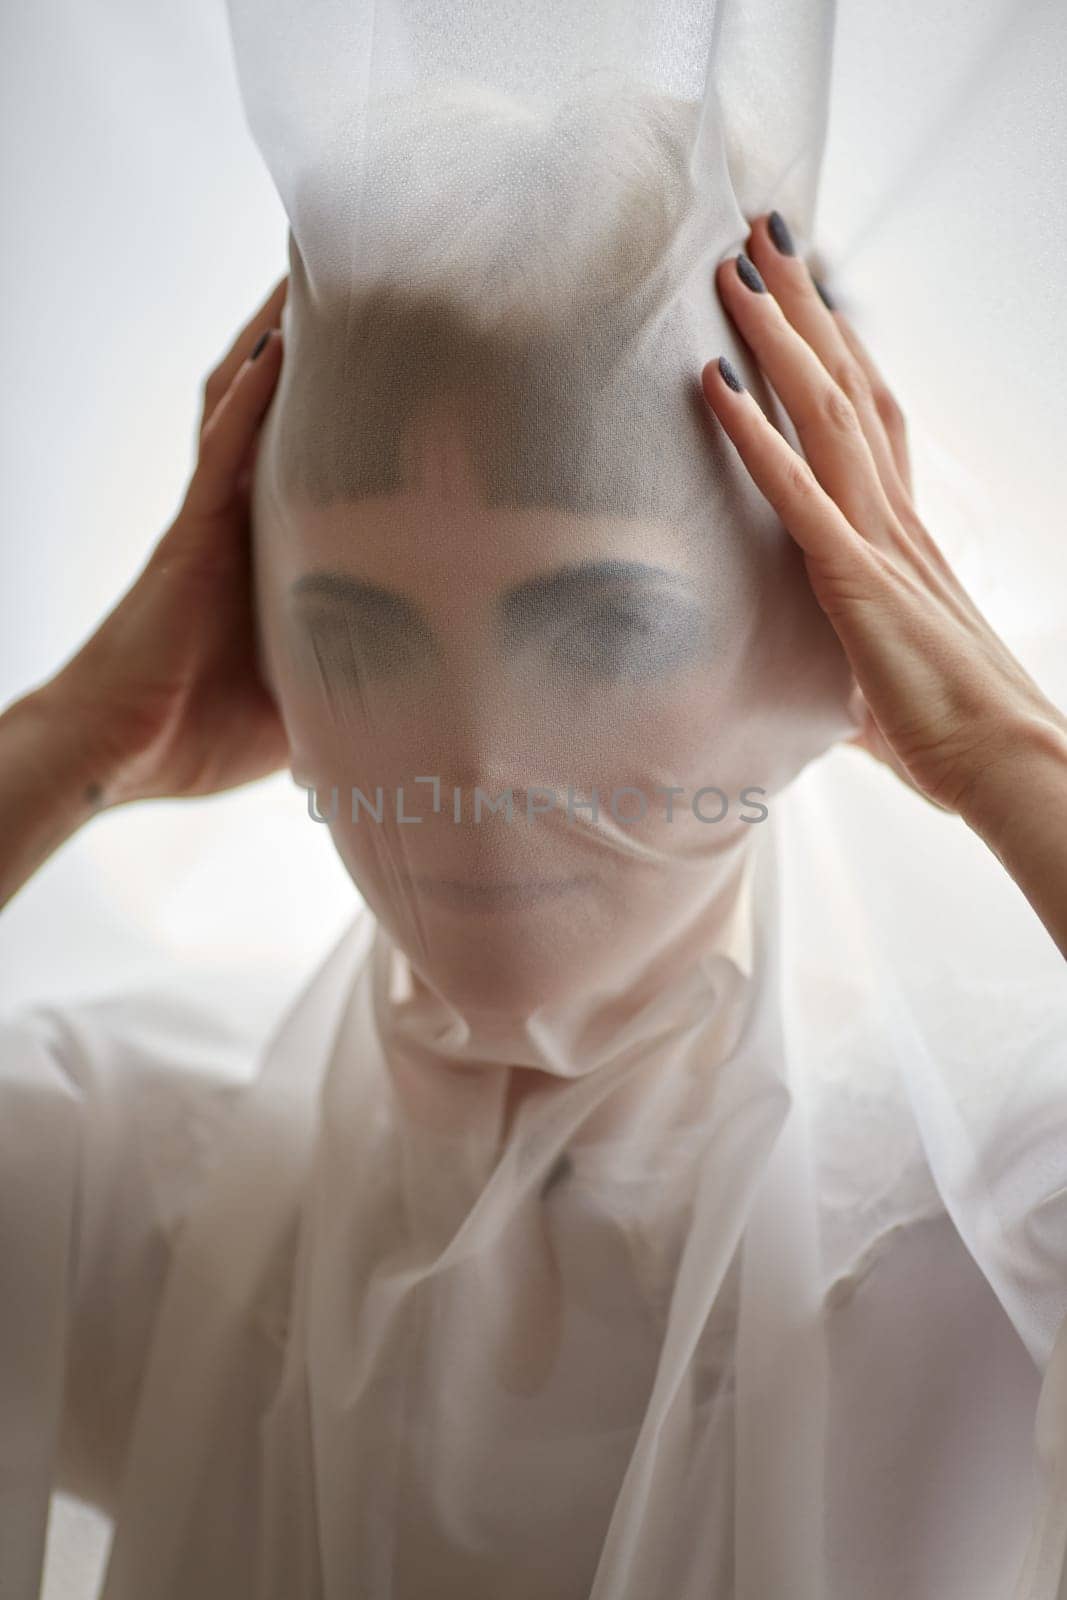 Woman portrait pulling fabric over face hiding face like a mask. Mysterious closeup portrait background of female human face under beautiful pearl silver supplex stretch fabric white vertical picture